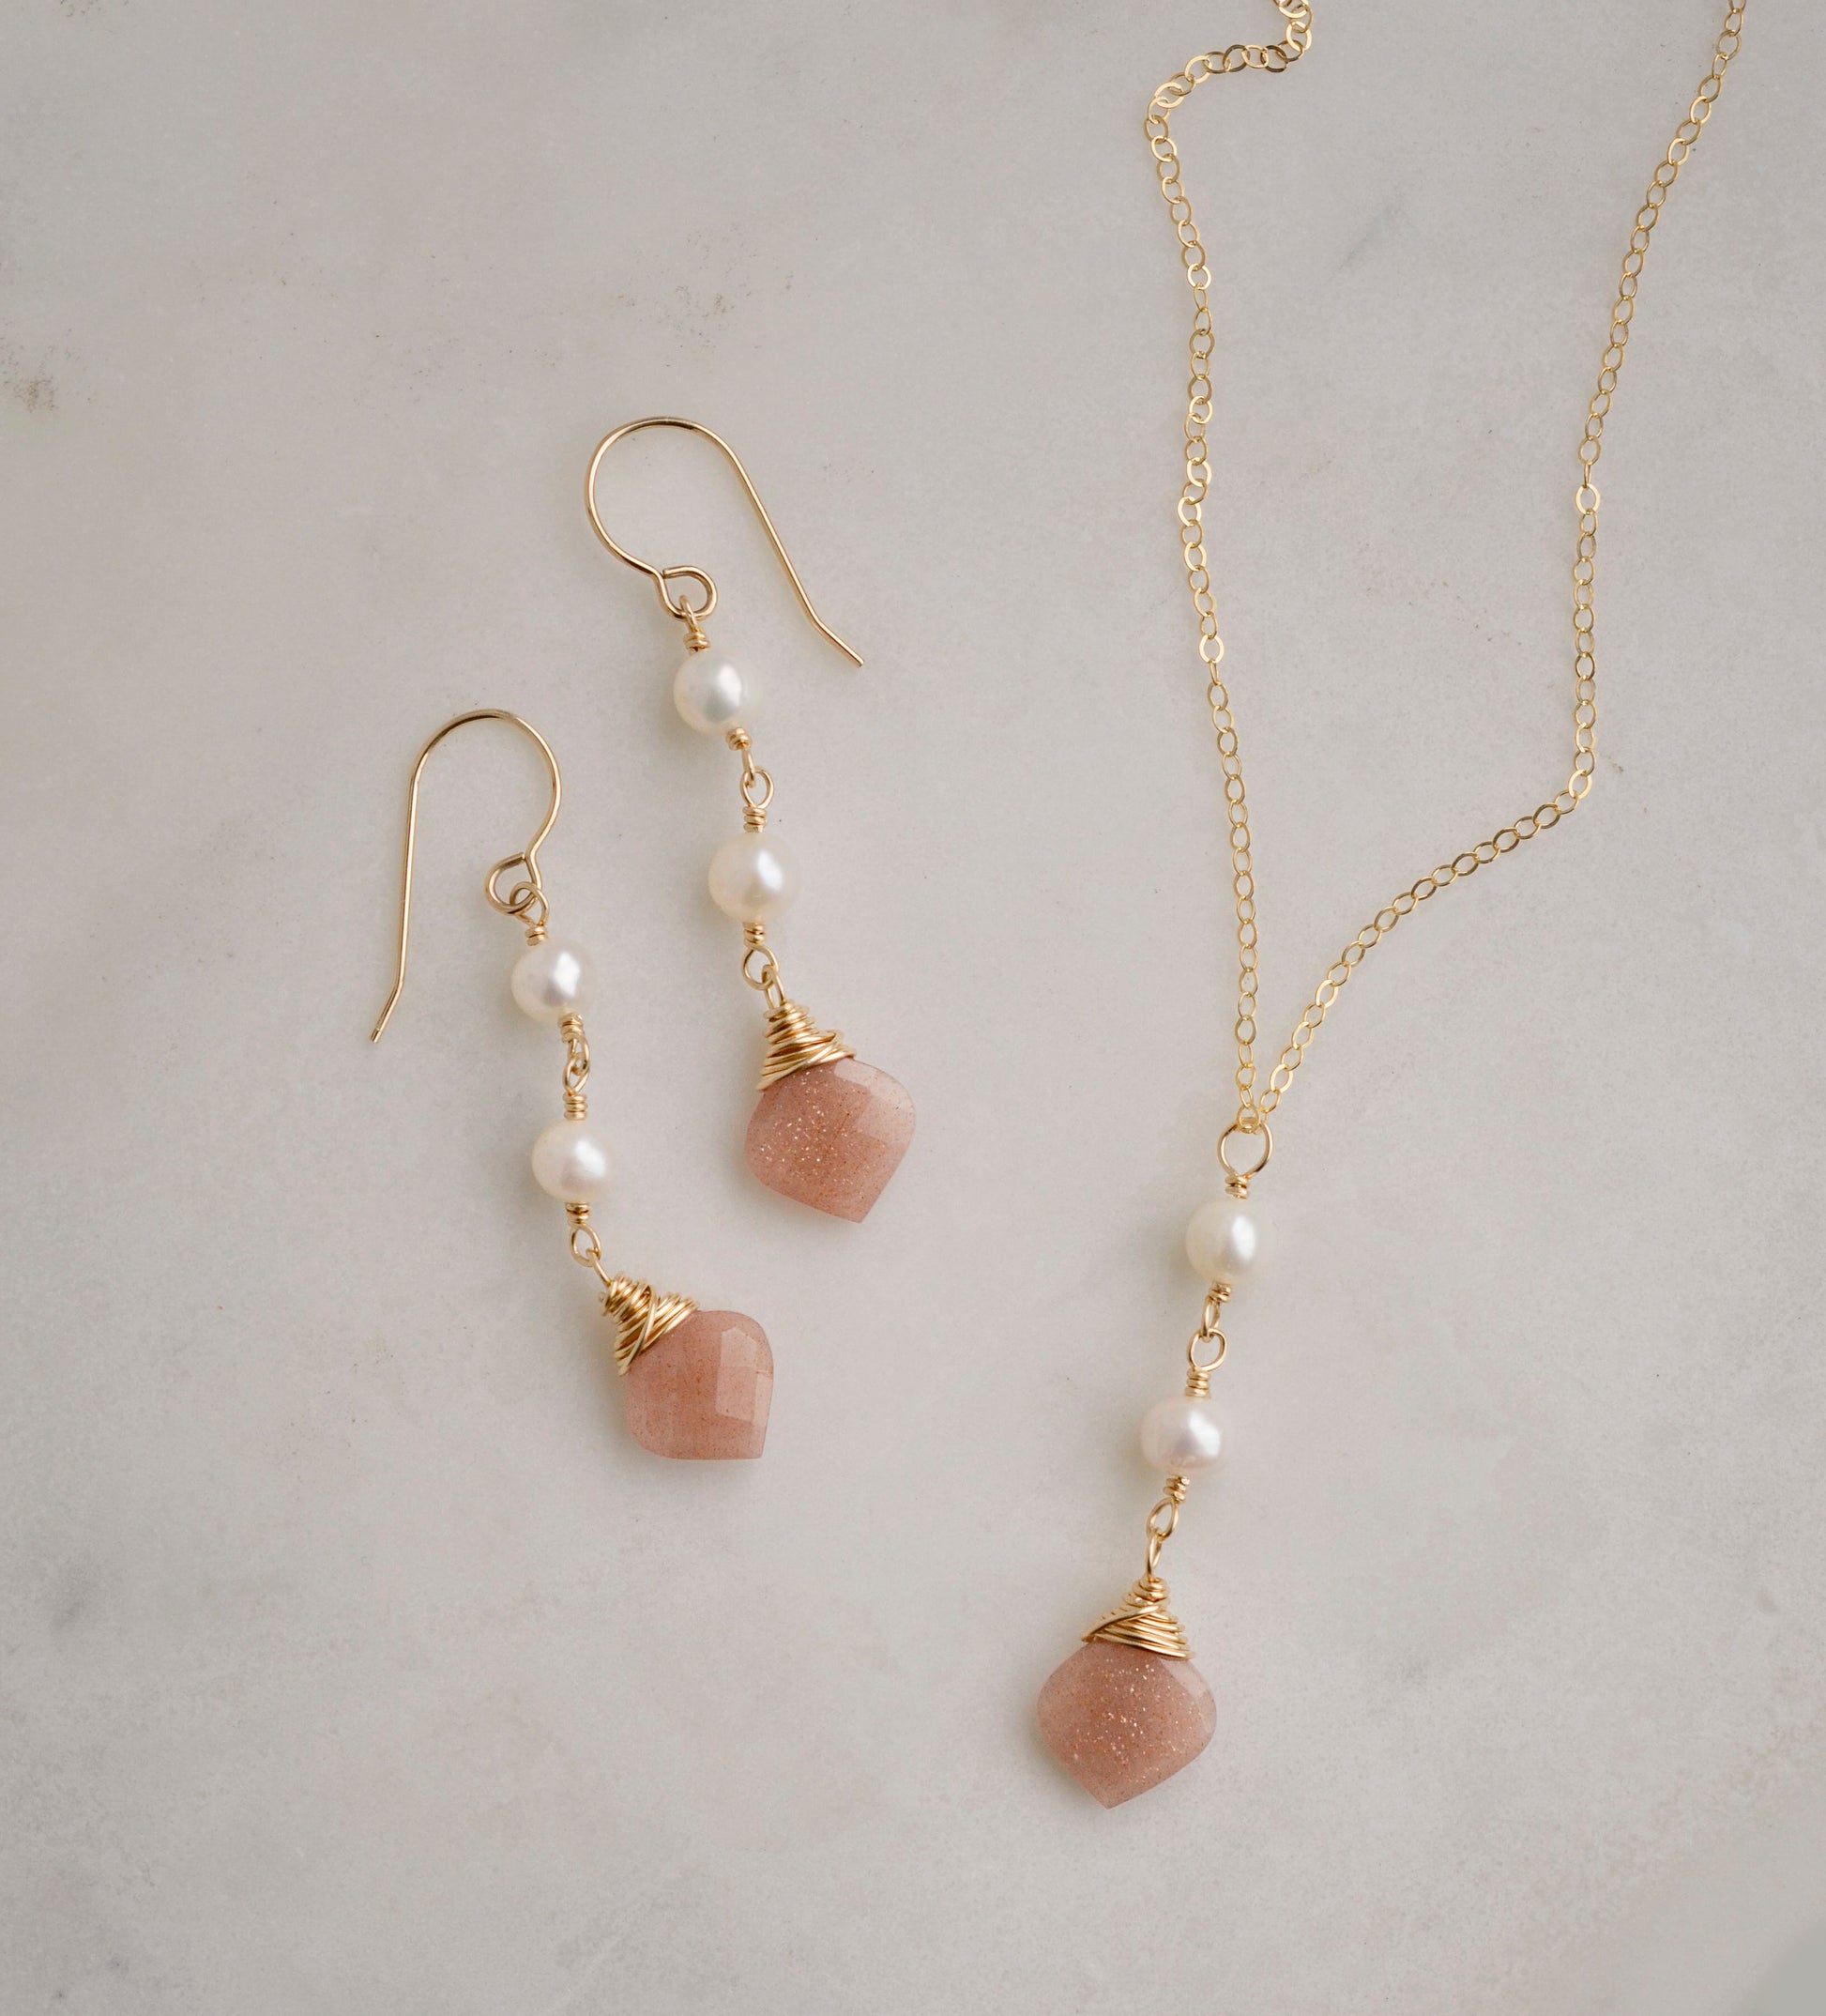 Two white semi-round pearls hang over natural peach Moonstone faceted drops. Shown with a matching necklace. The gold style is shown.